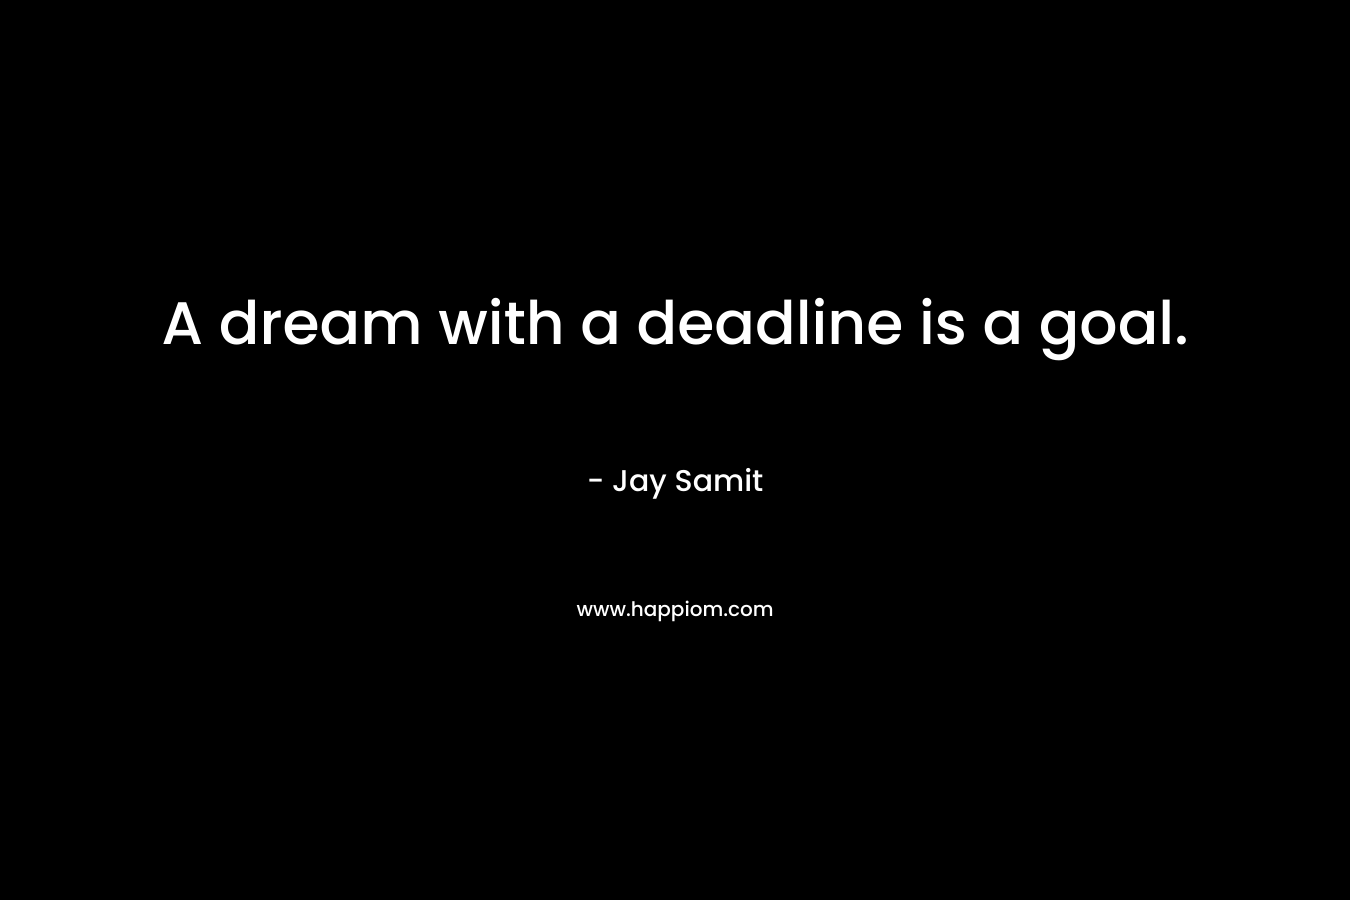 A dream with a deadline is a goal.